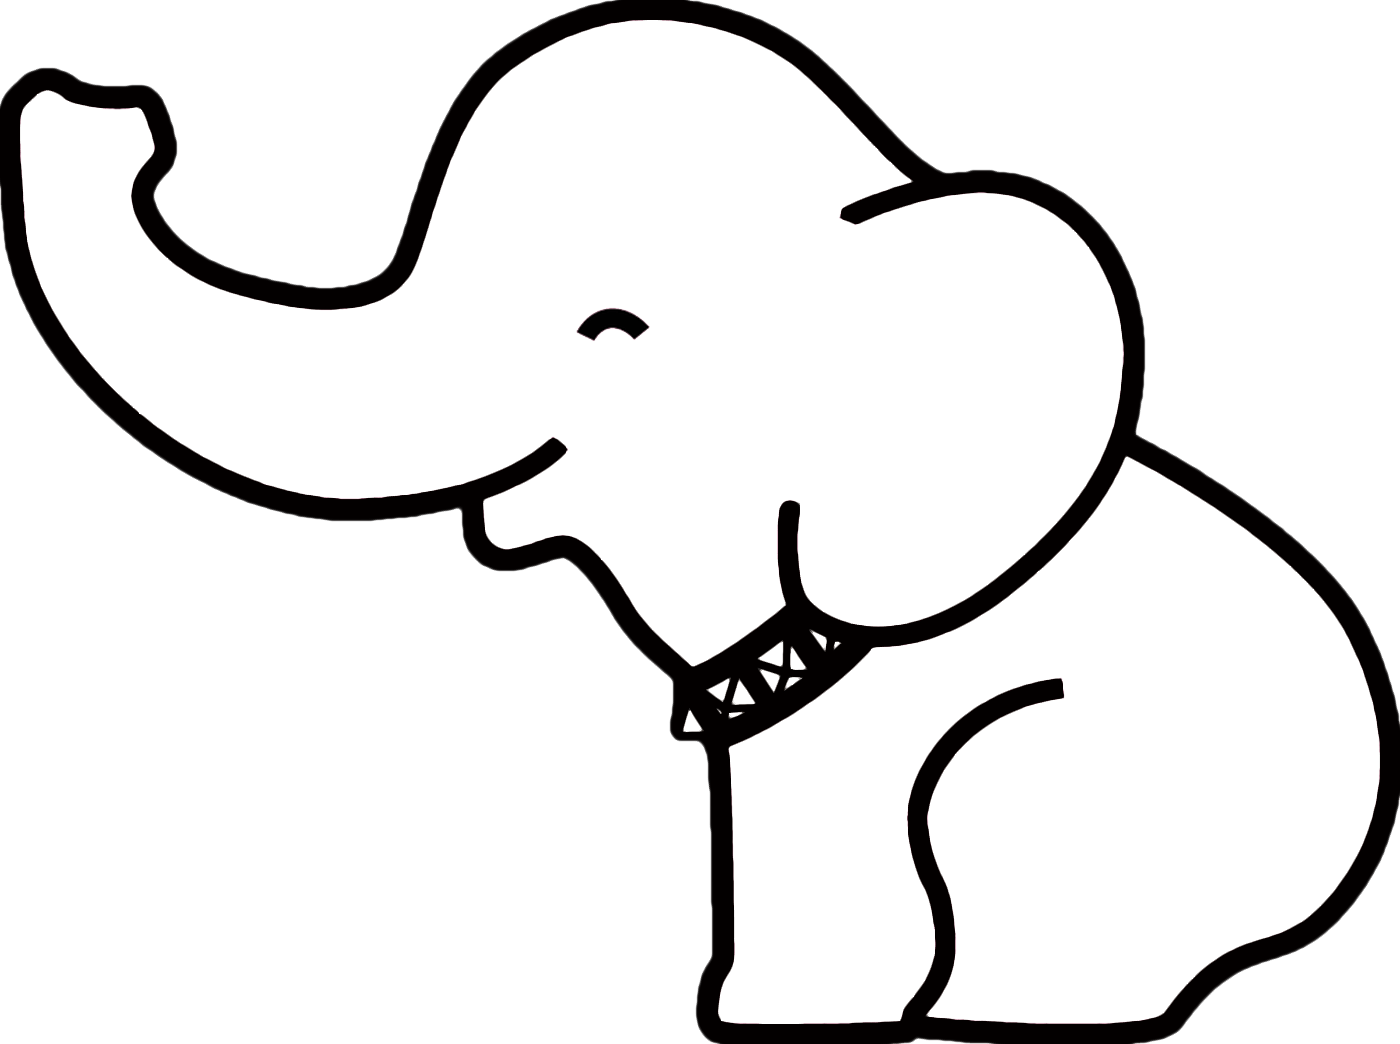 Download PNG image - White Elephant PNG Image 